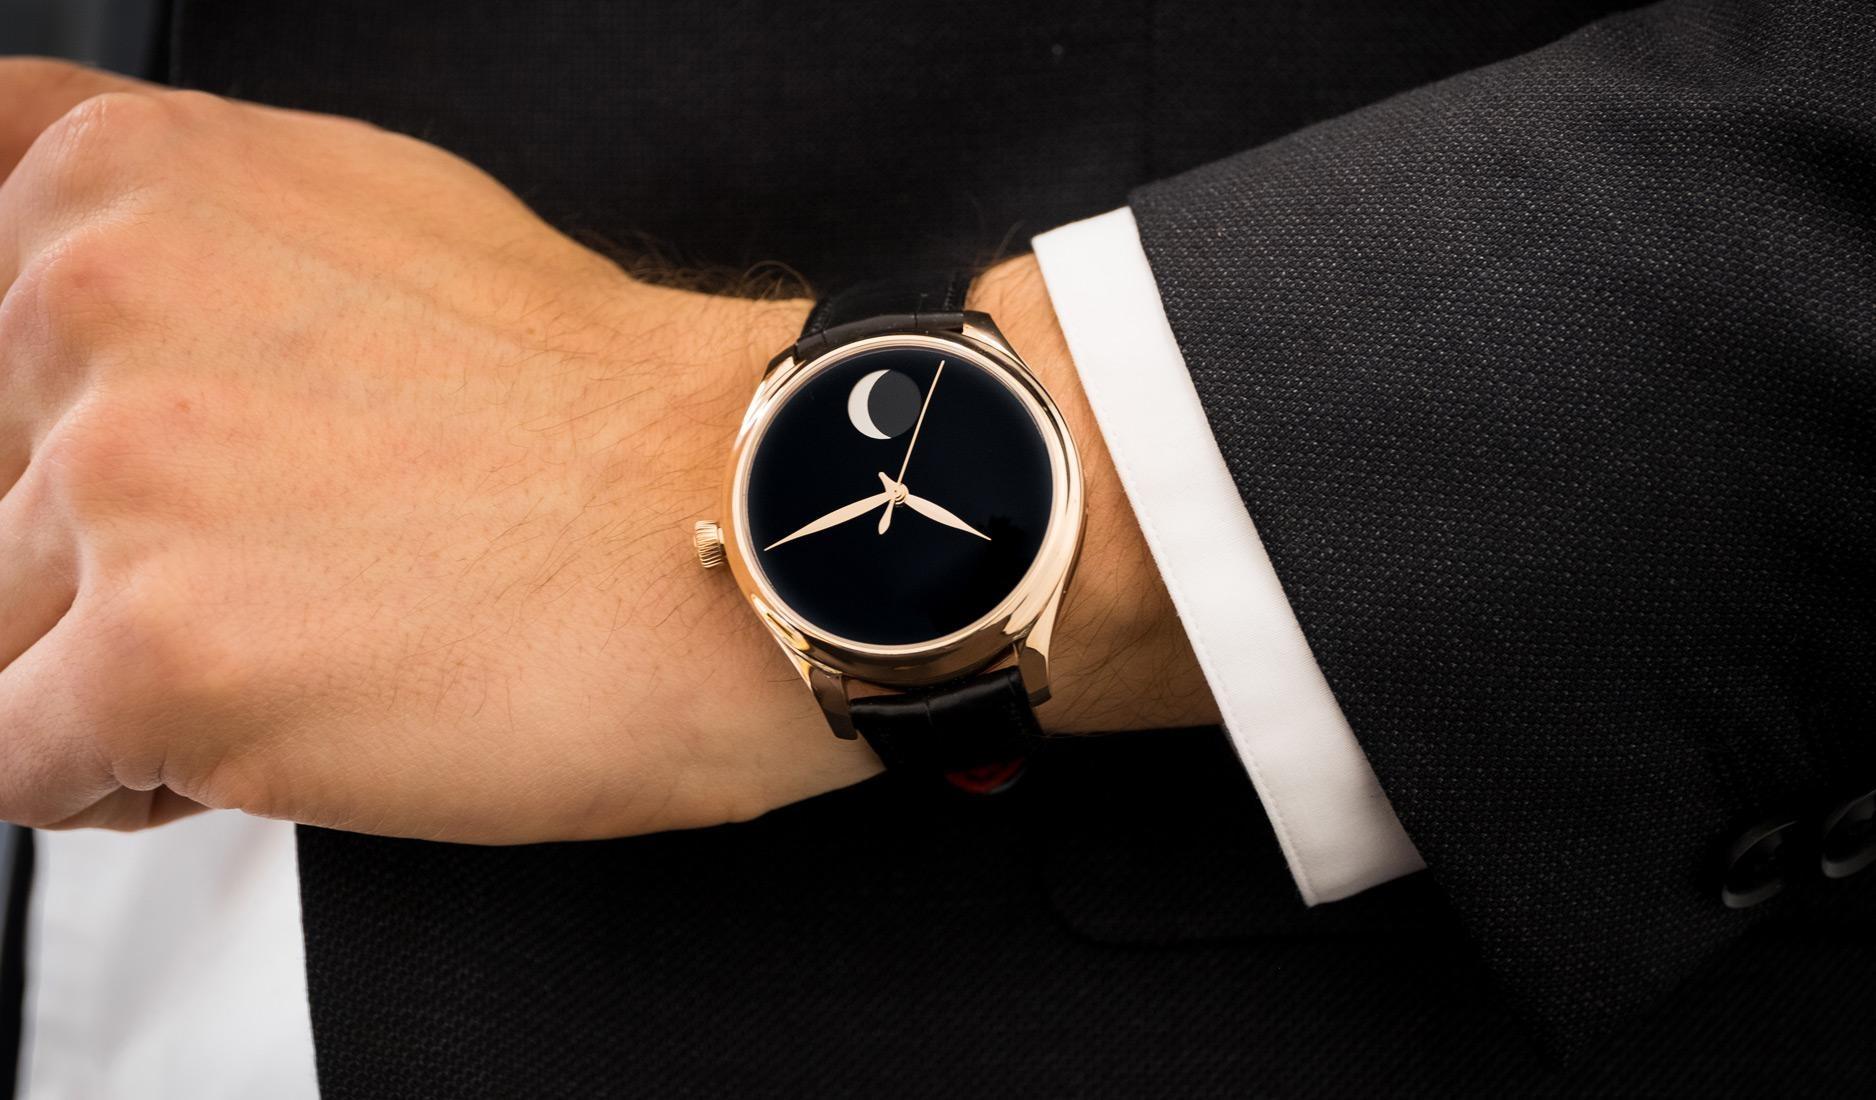 H. Moser & Cie. Endeavour Perpetual Moon Concept Only Watch